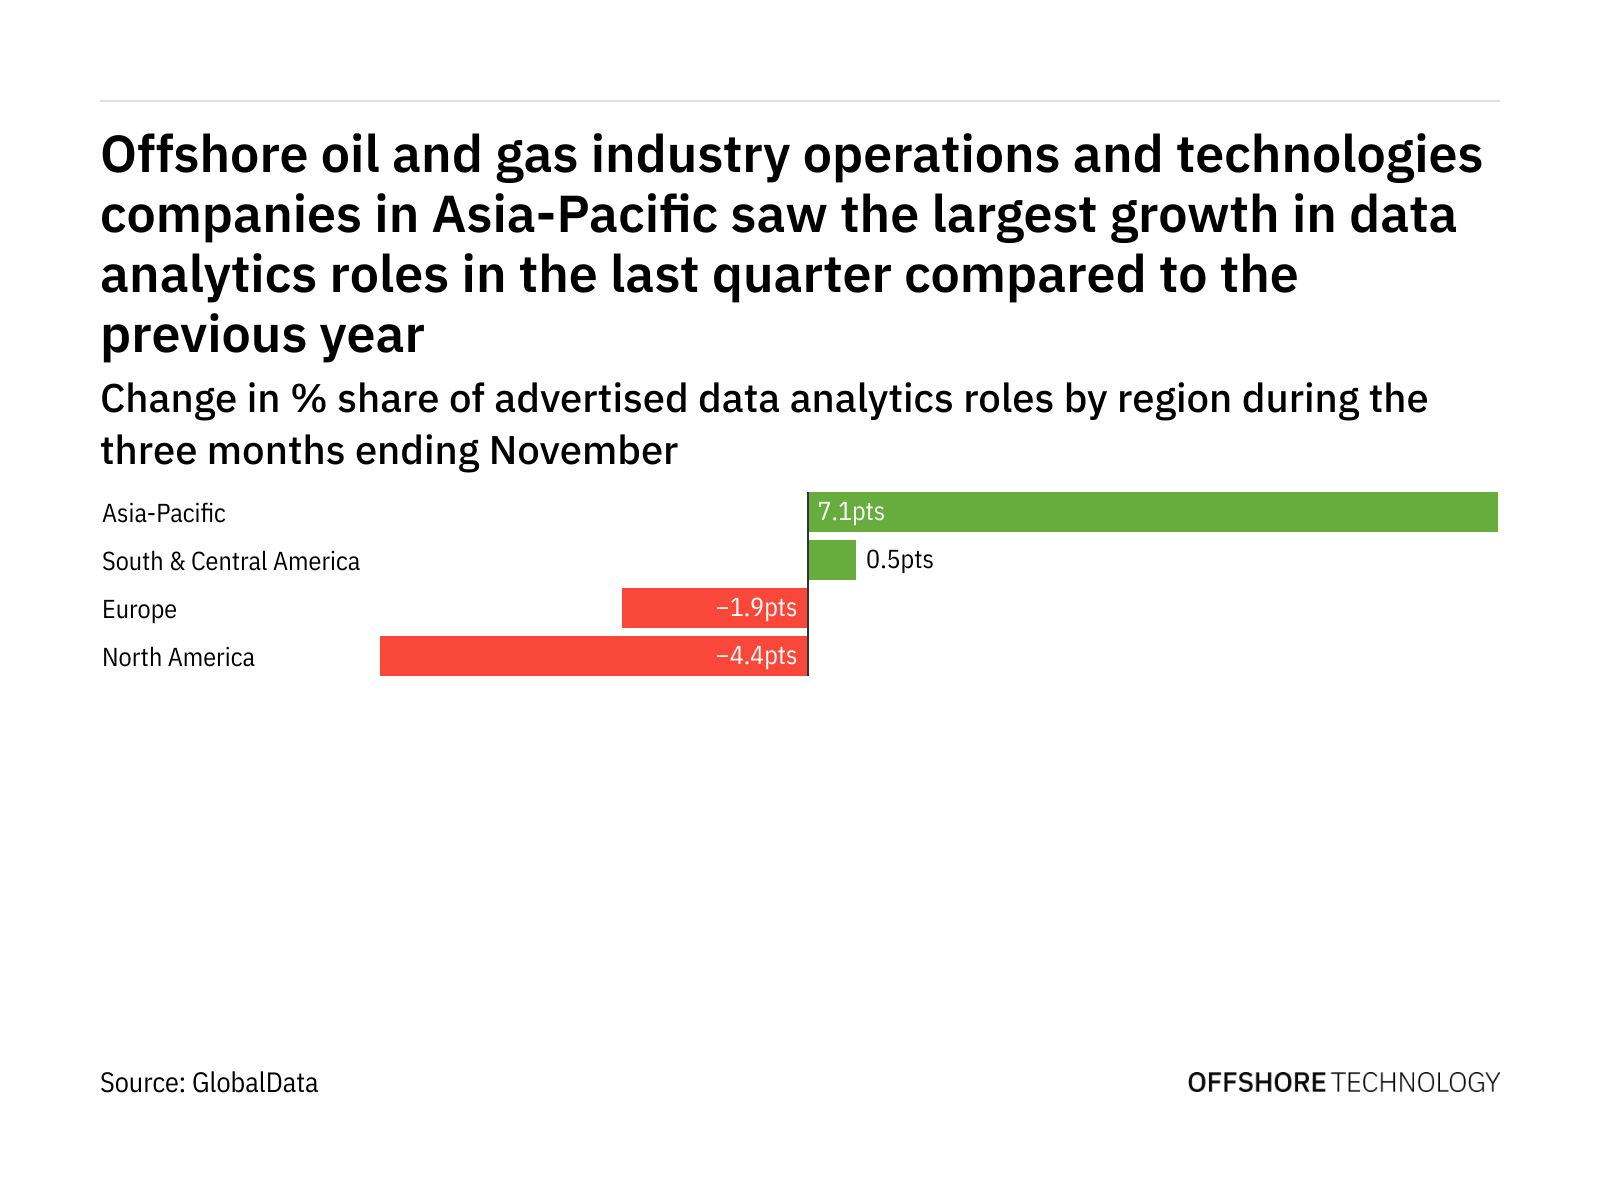 Asia-Pacific is seeing a hiring boom in offshore industry data analytics roles